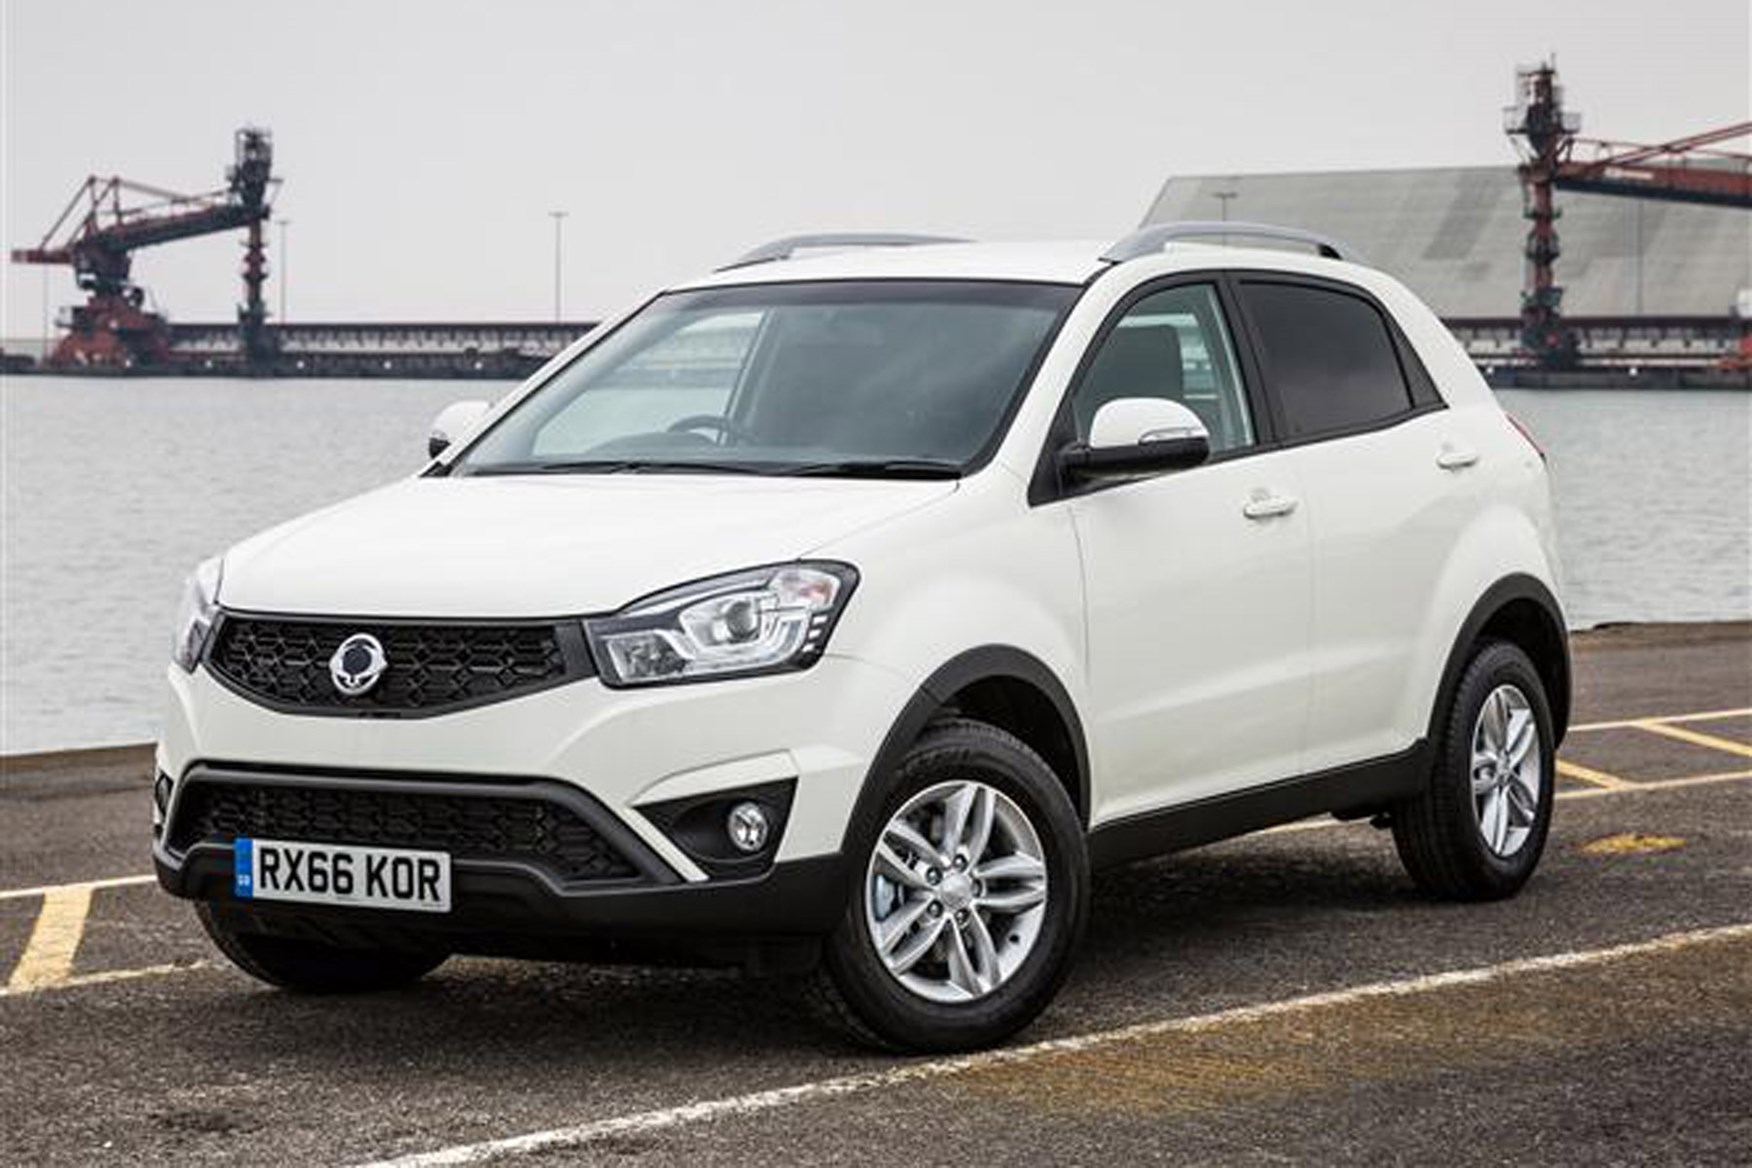 SsangYong Korando review on Parkers Vans - exterior